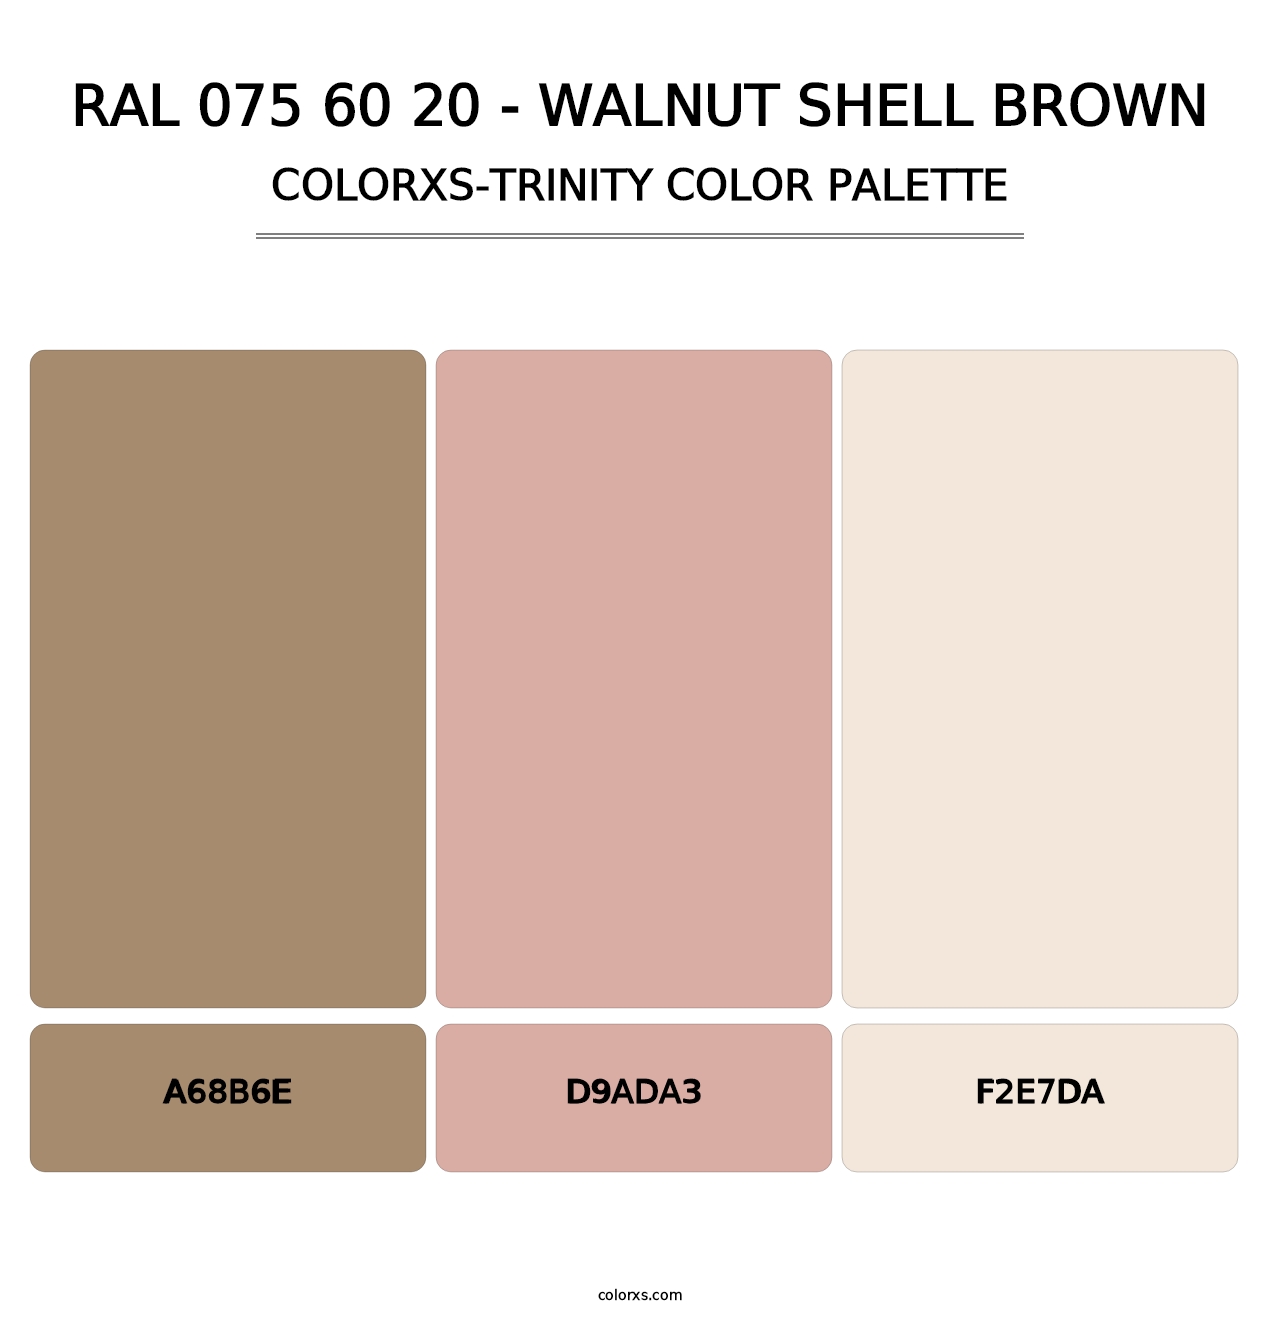 RAL 075 60 20 - Walnut Shell Brown - Colorxs Trinity Palette